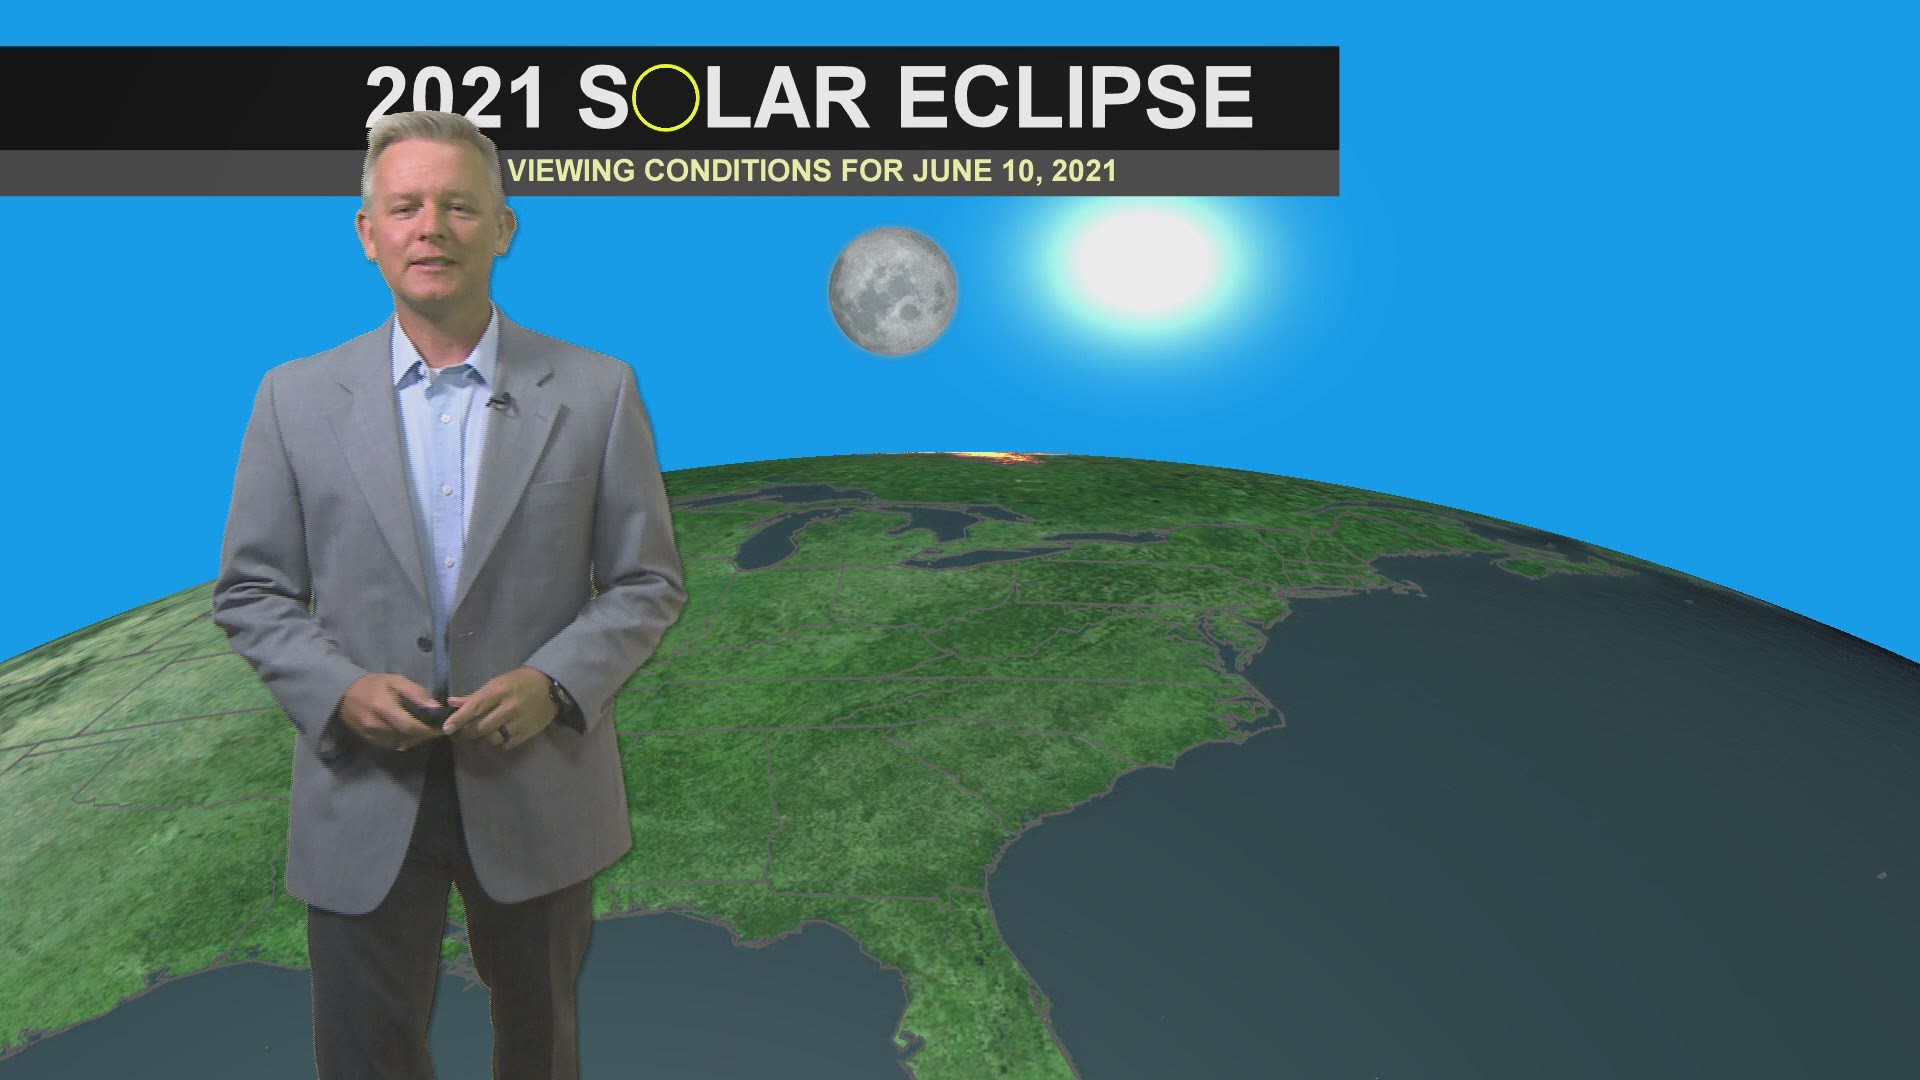 In South Carolina, the partial solar eclipse Thursday morning will only cover about 1% to 15% of the Sun, nothing like the state experienced in 2017.